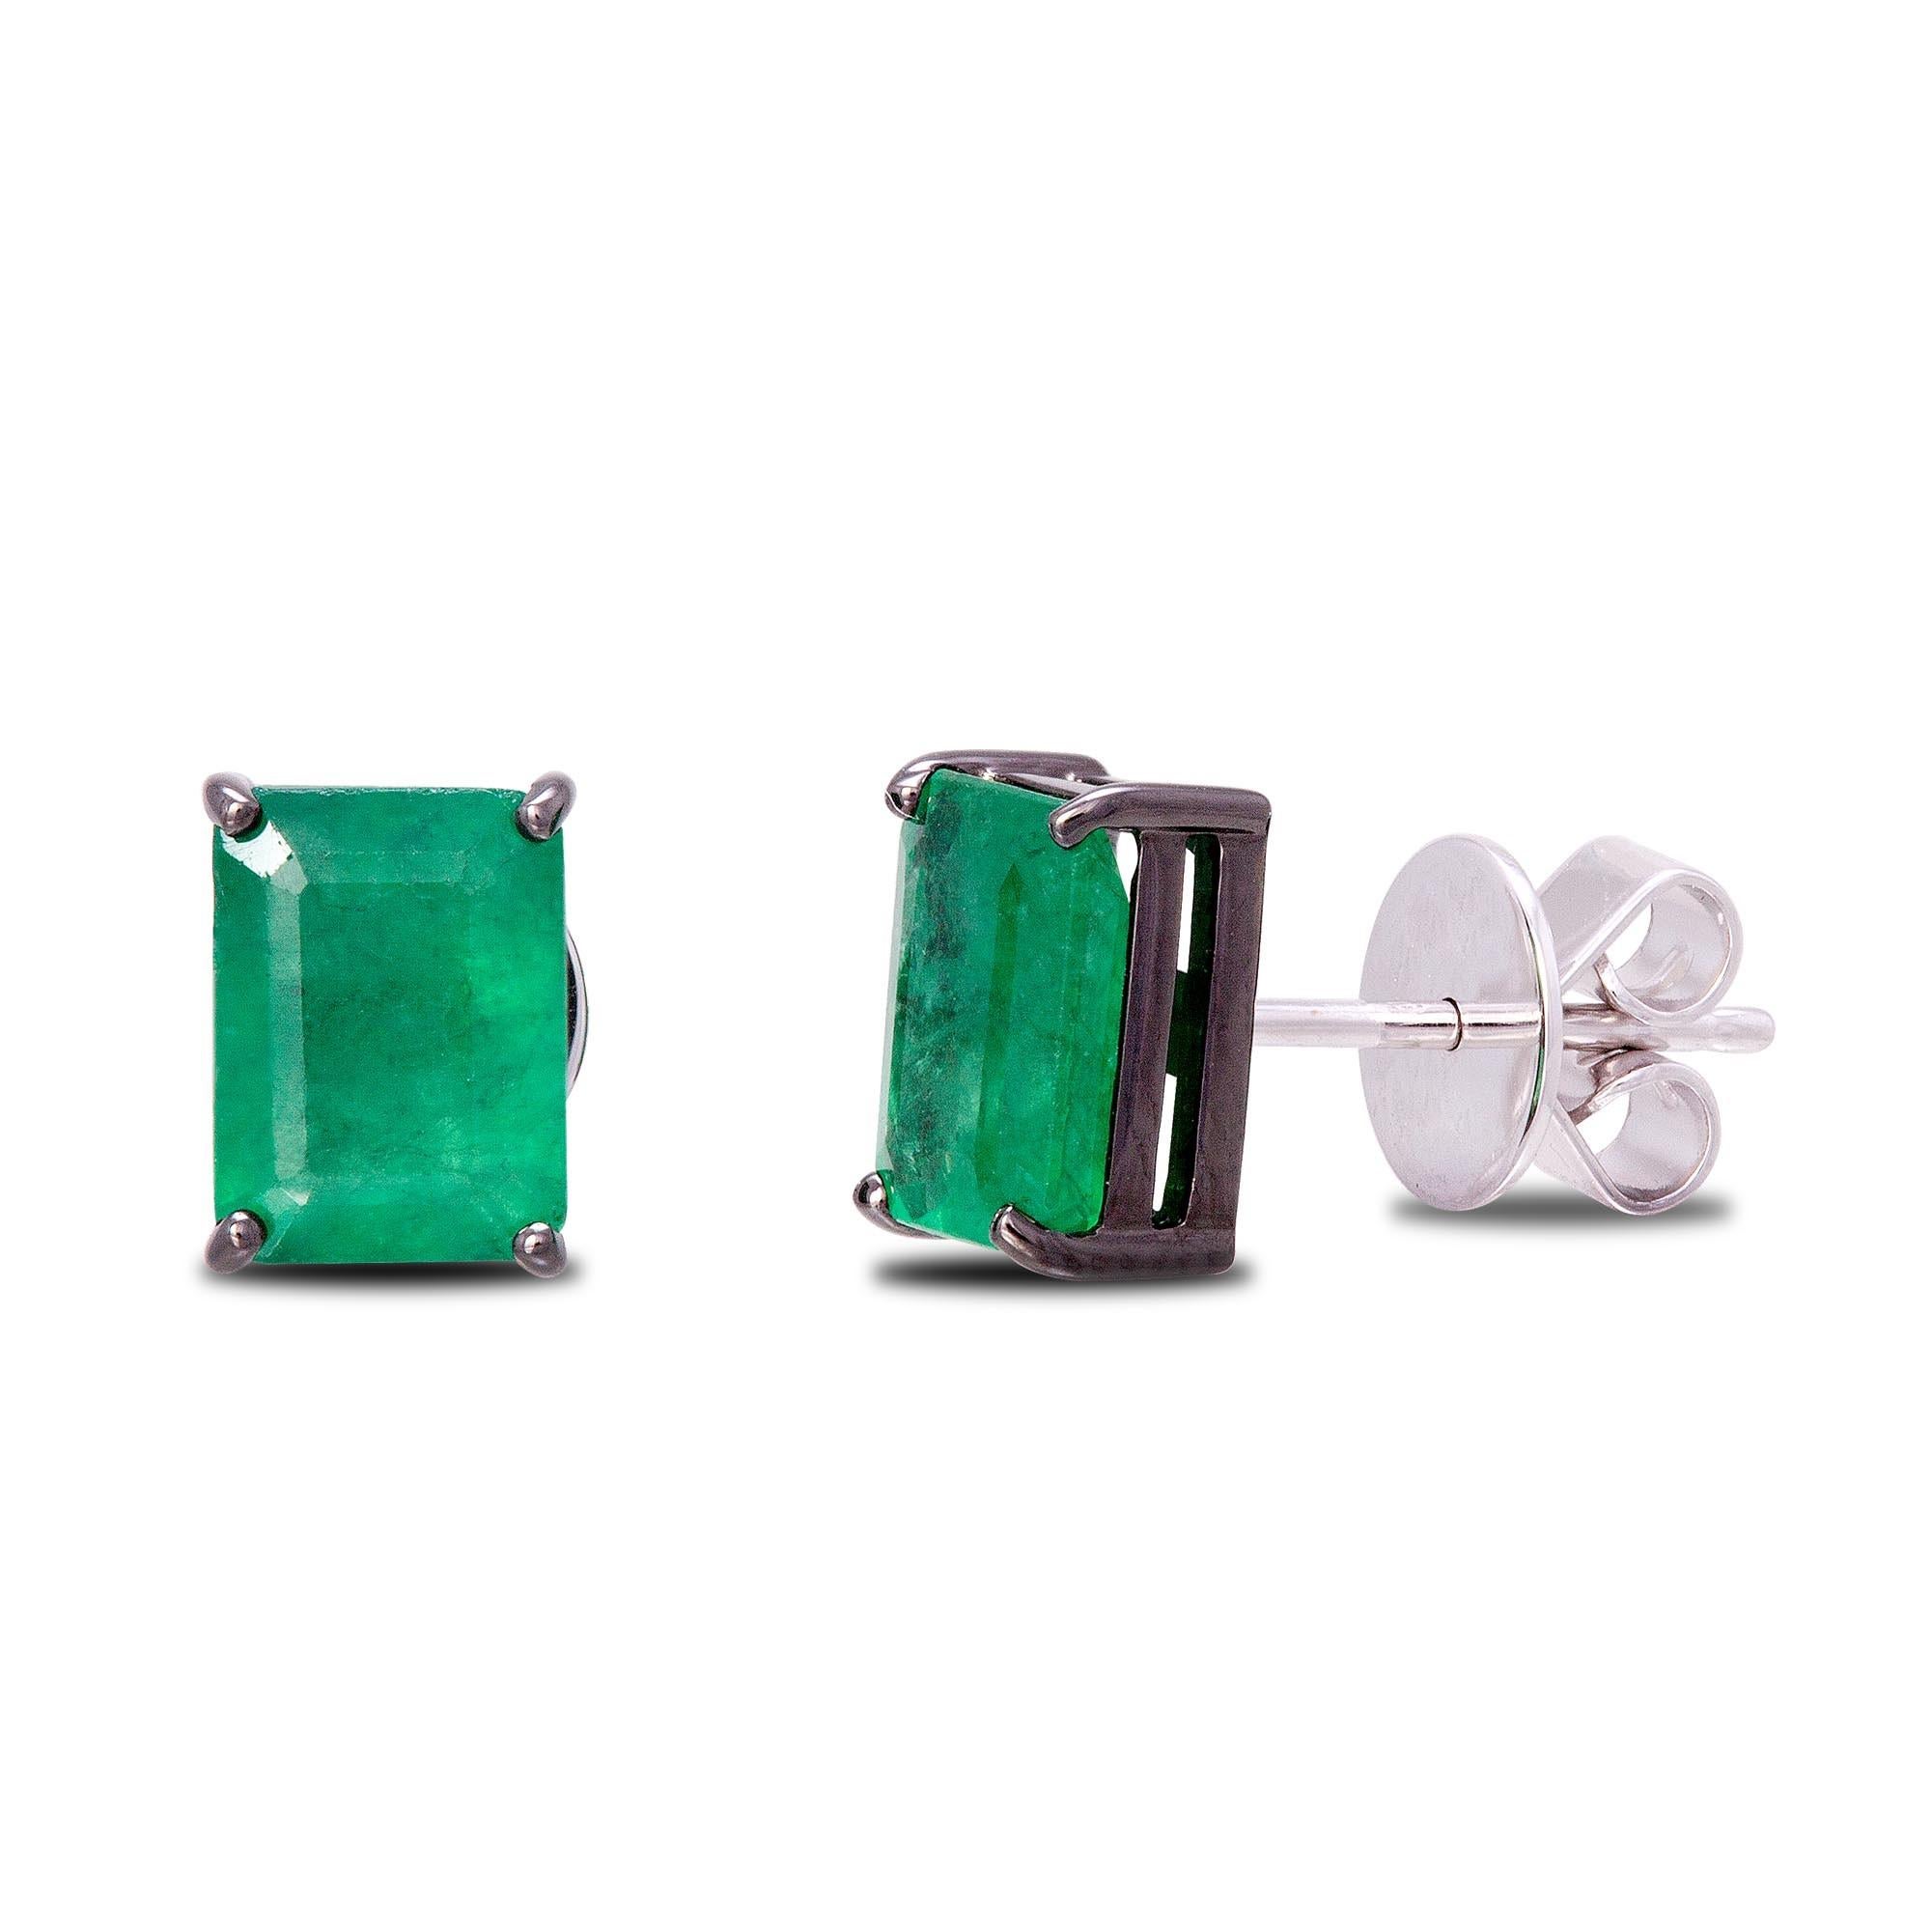 The Following Items we are offering is a Pair of Rare 18KT Gold Large Emerald Stud Earrings. Earrings are comprised of Finely Set Gorgeous Large Gorgeous Green Emerald Stud Earrings!!! T.C.W. Approx 3.75CTS.  These Gorgeous Earrings are a Rare